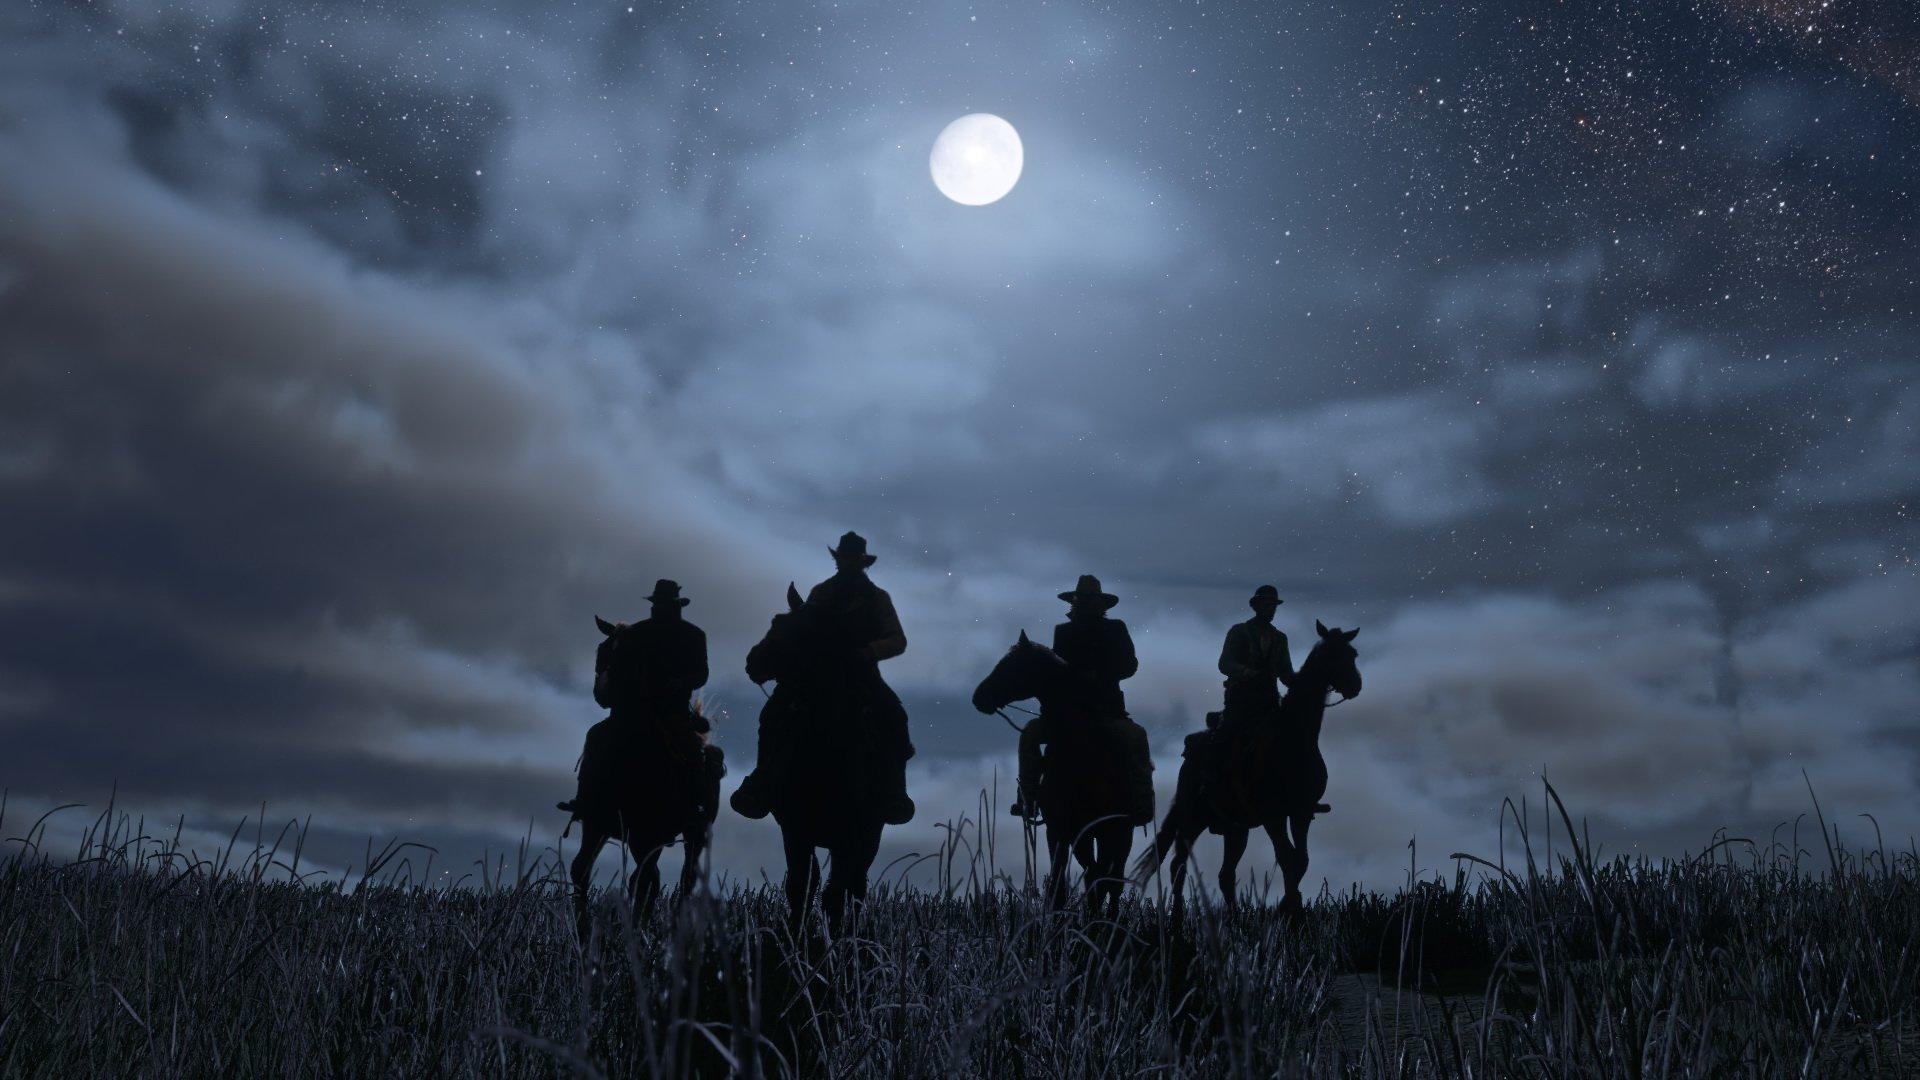 gamestop used red dead redemption 2